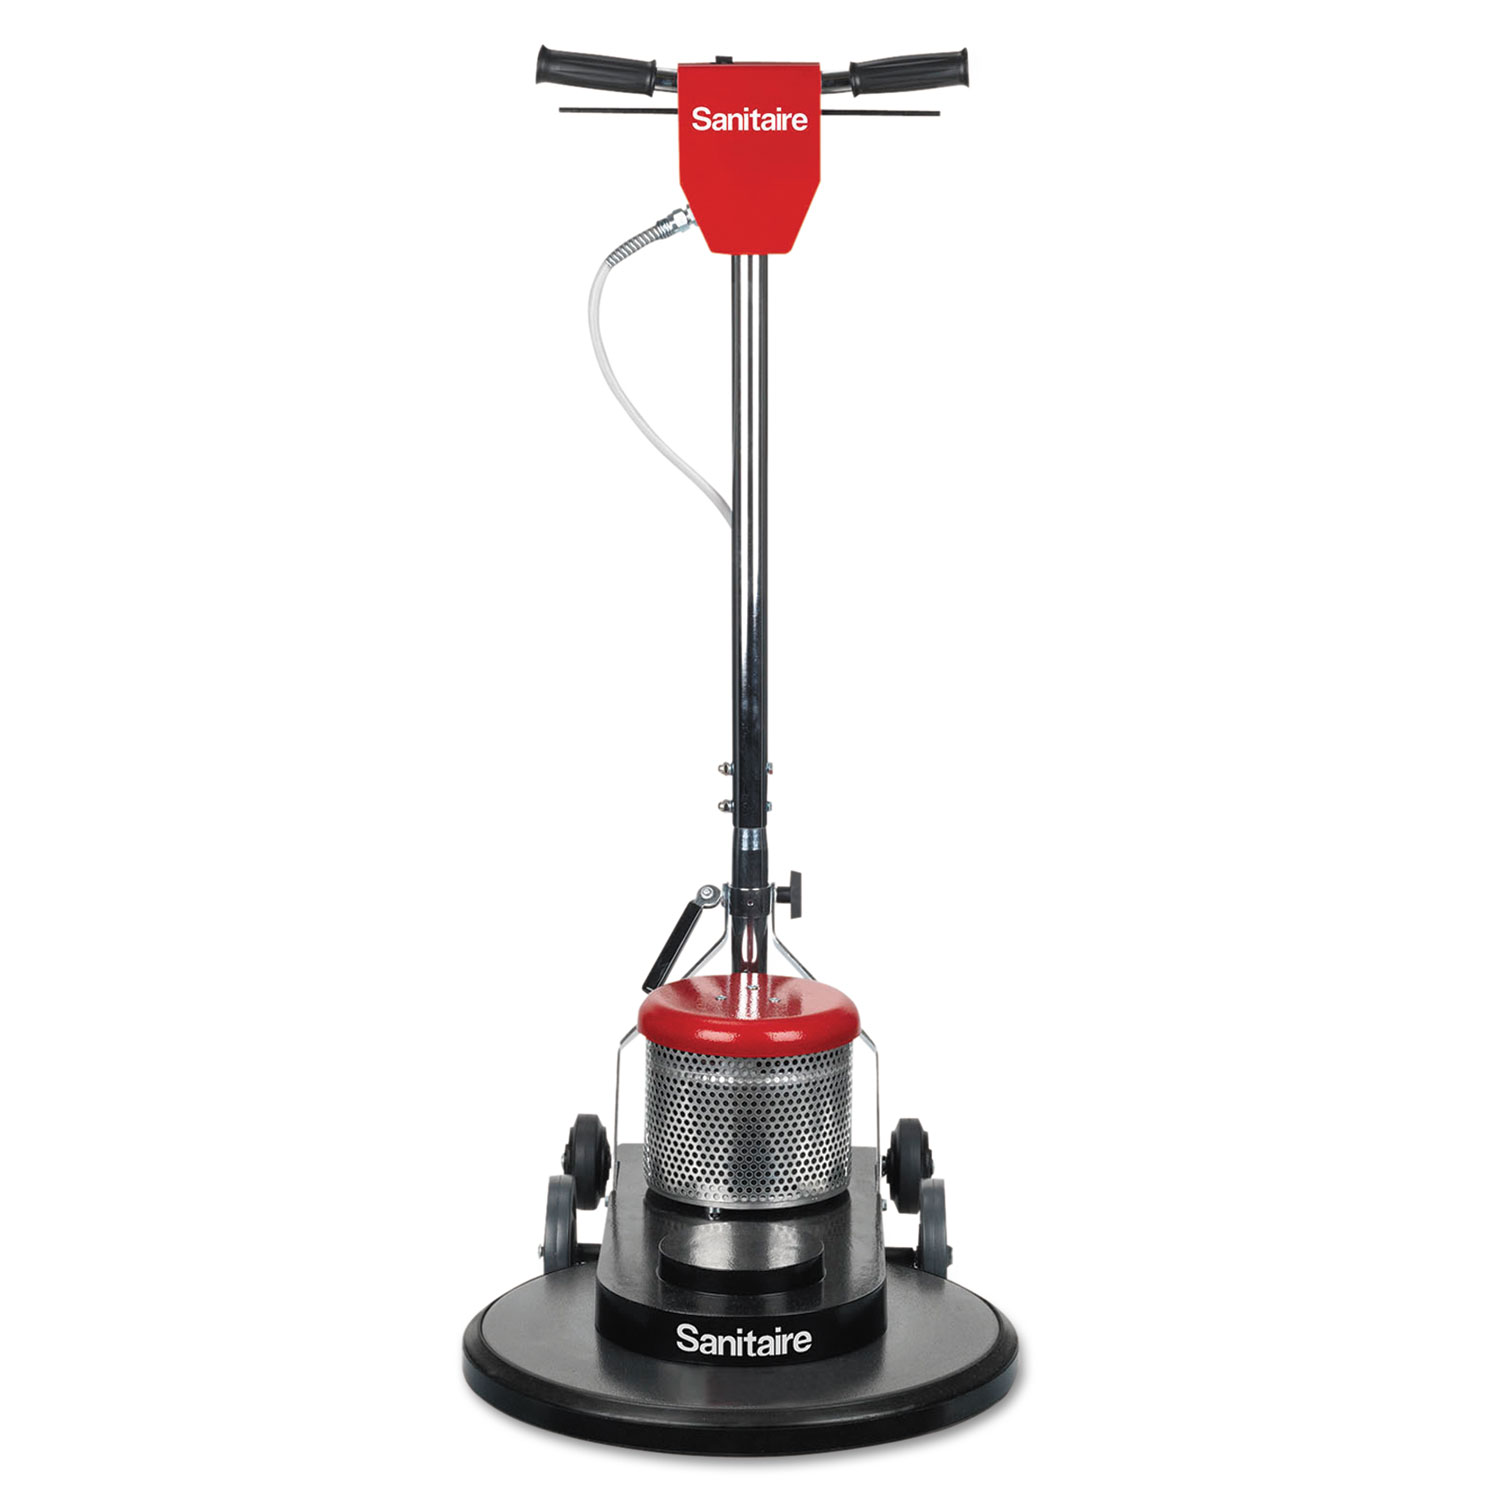 Commercial High-Speed Floor Burnisher, 1 1/2 HP Motor, 20 Pad, 1500 RPM